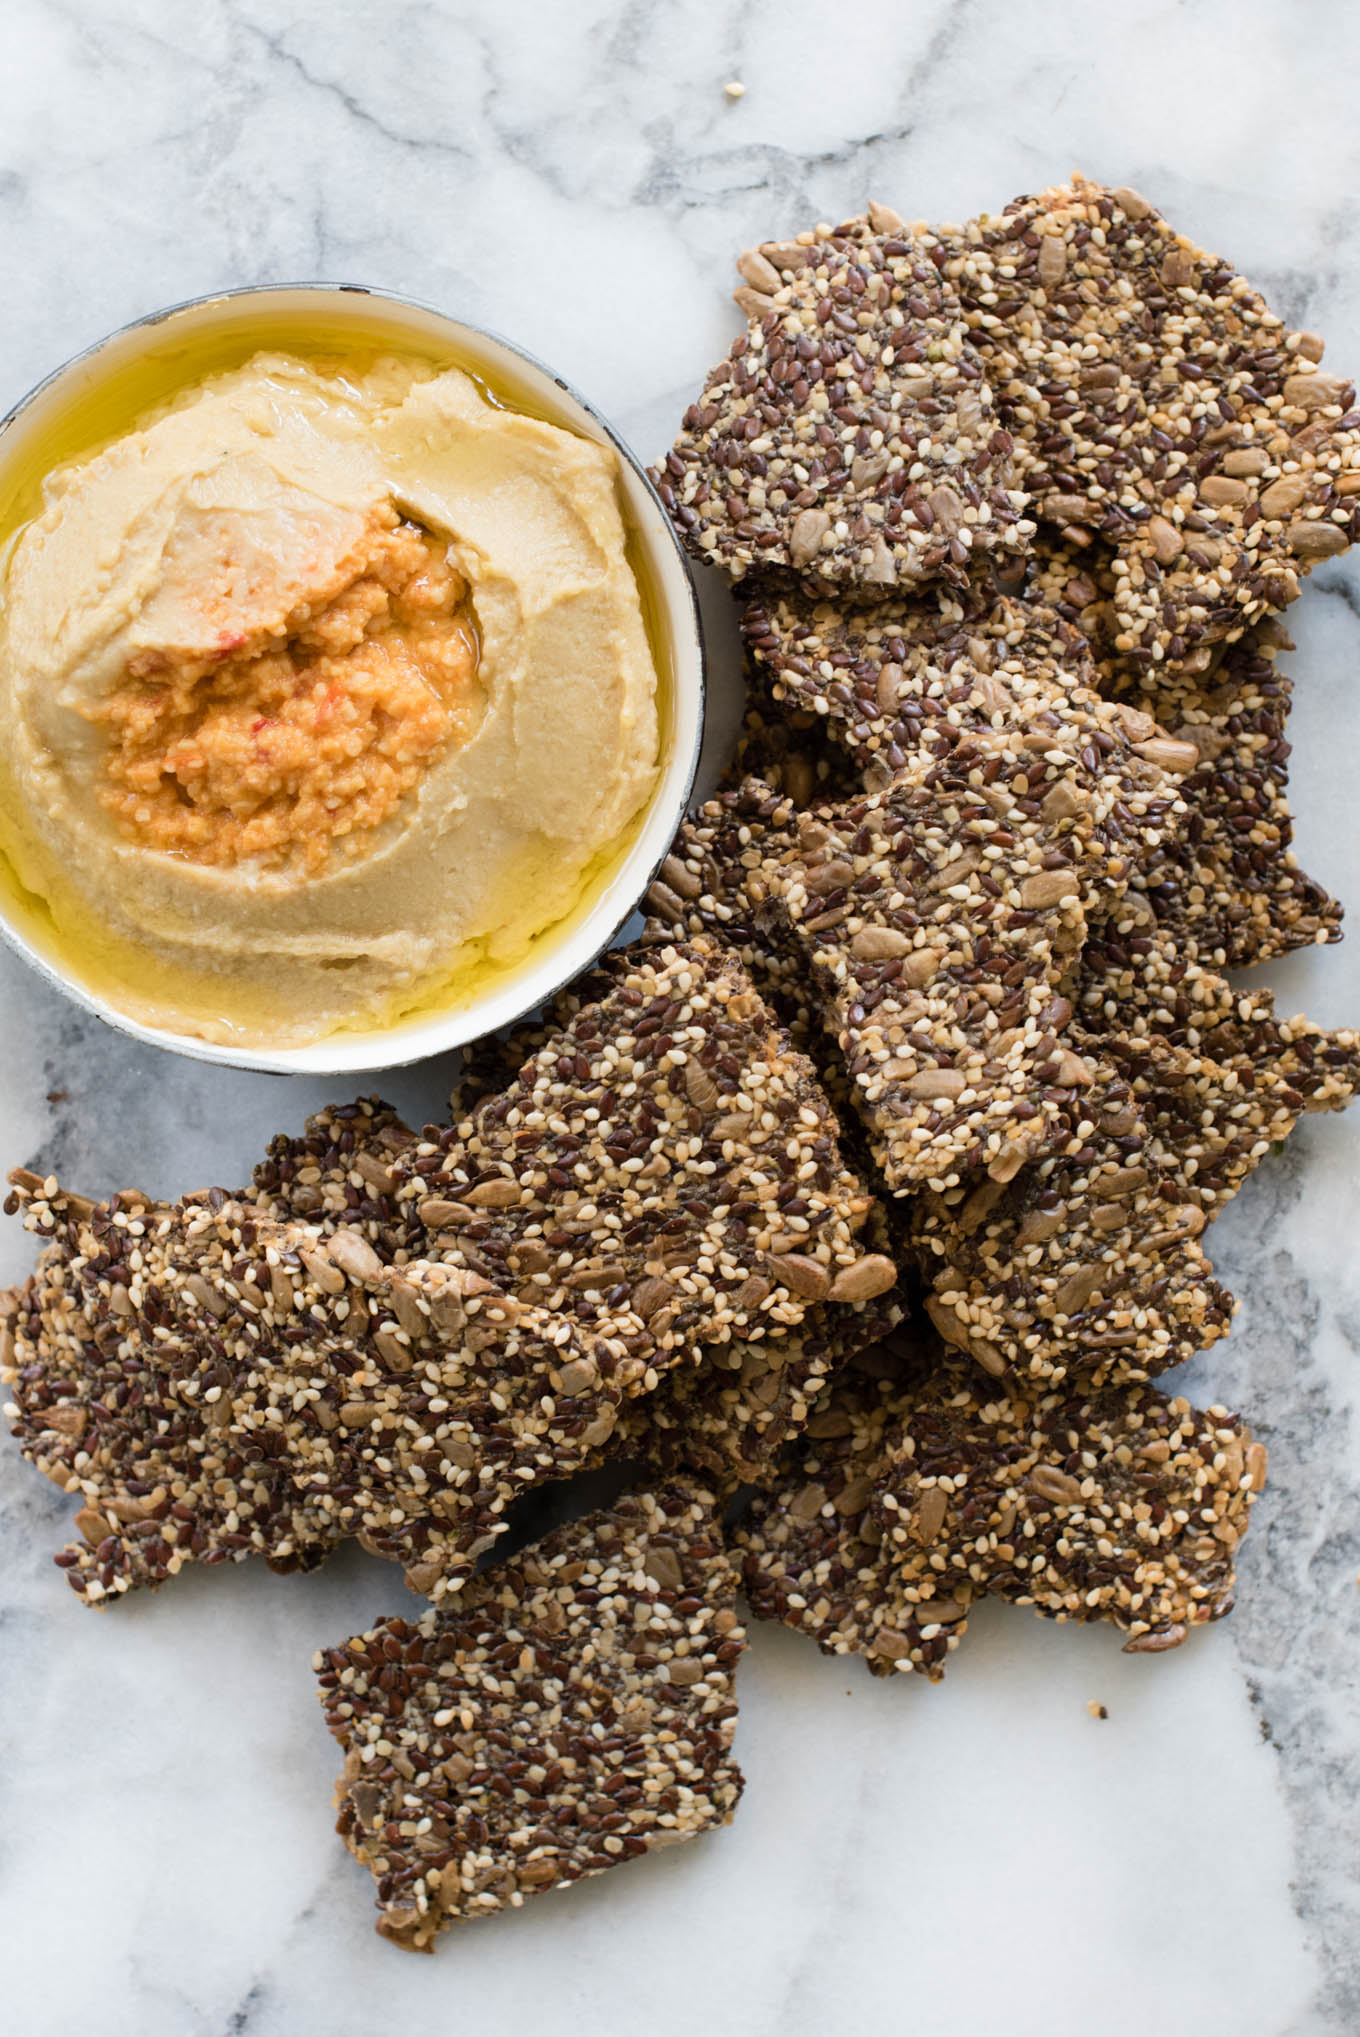 These simple seed crackers will provide a nutritious base for your dipping needs and are gluten and grain free.